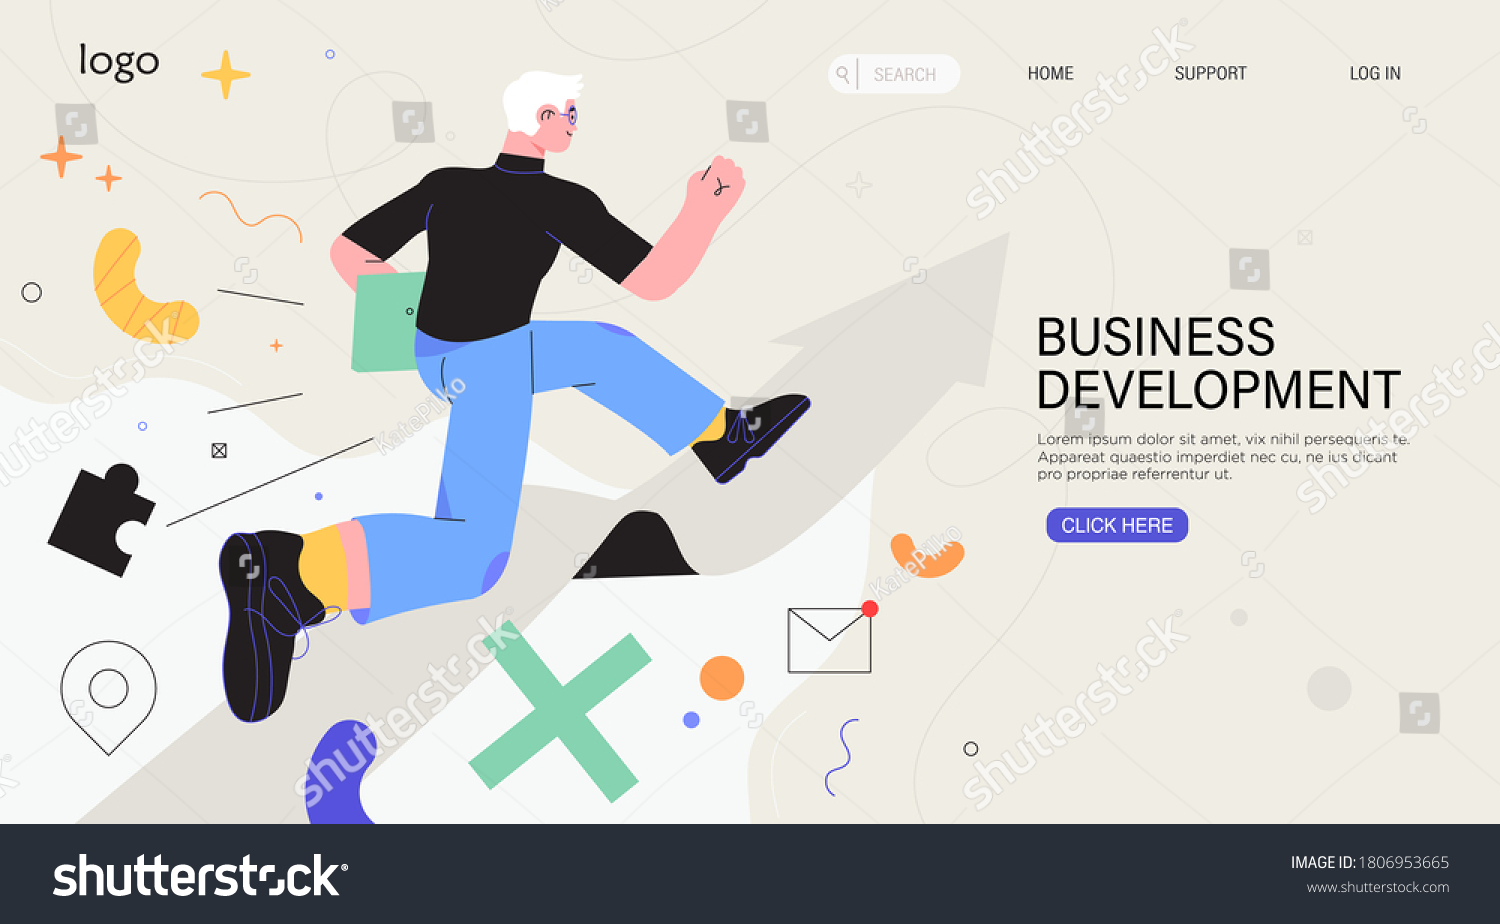 Businessman running on arrow through obstacles to his goal. Business developement, career success or growth and opportunity, startup concept banner, landing web page. Creative trendy character. #1806953665